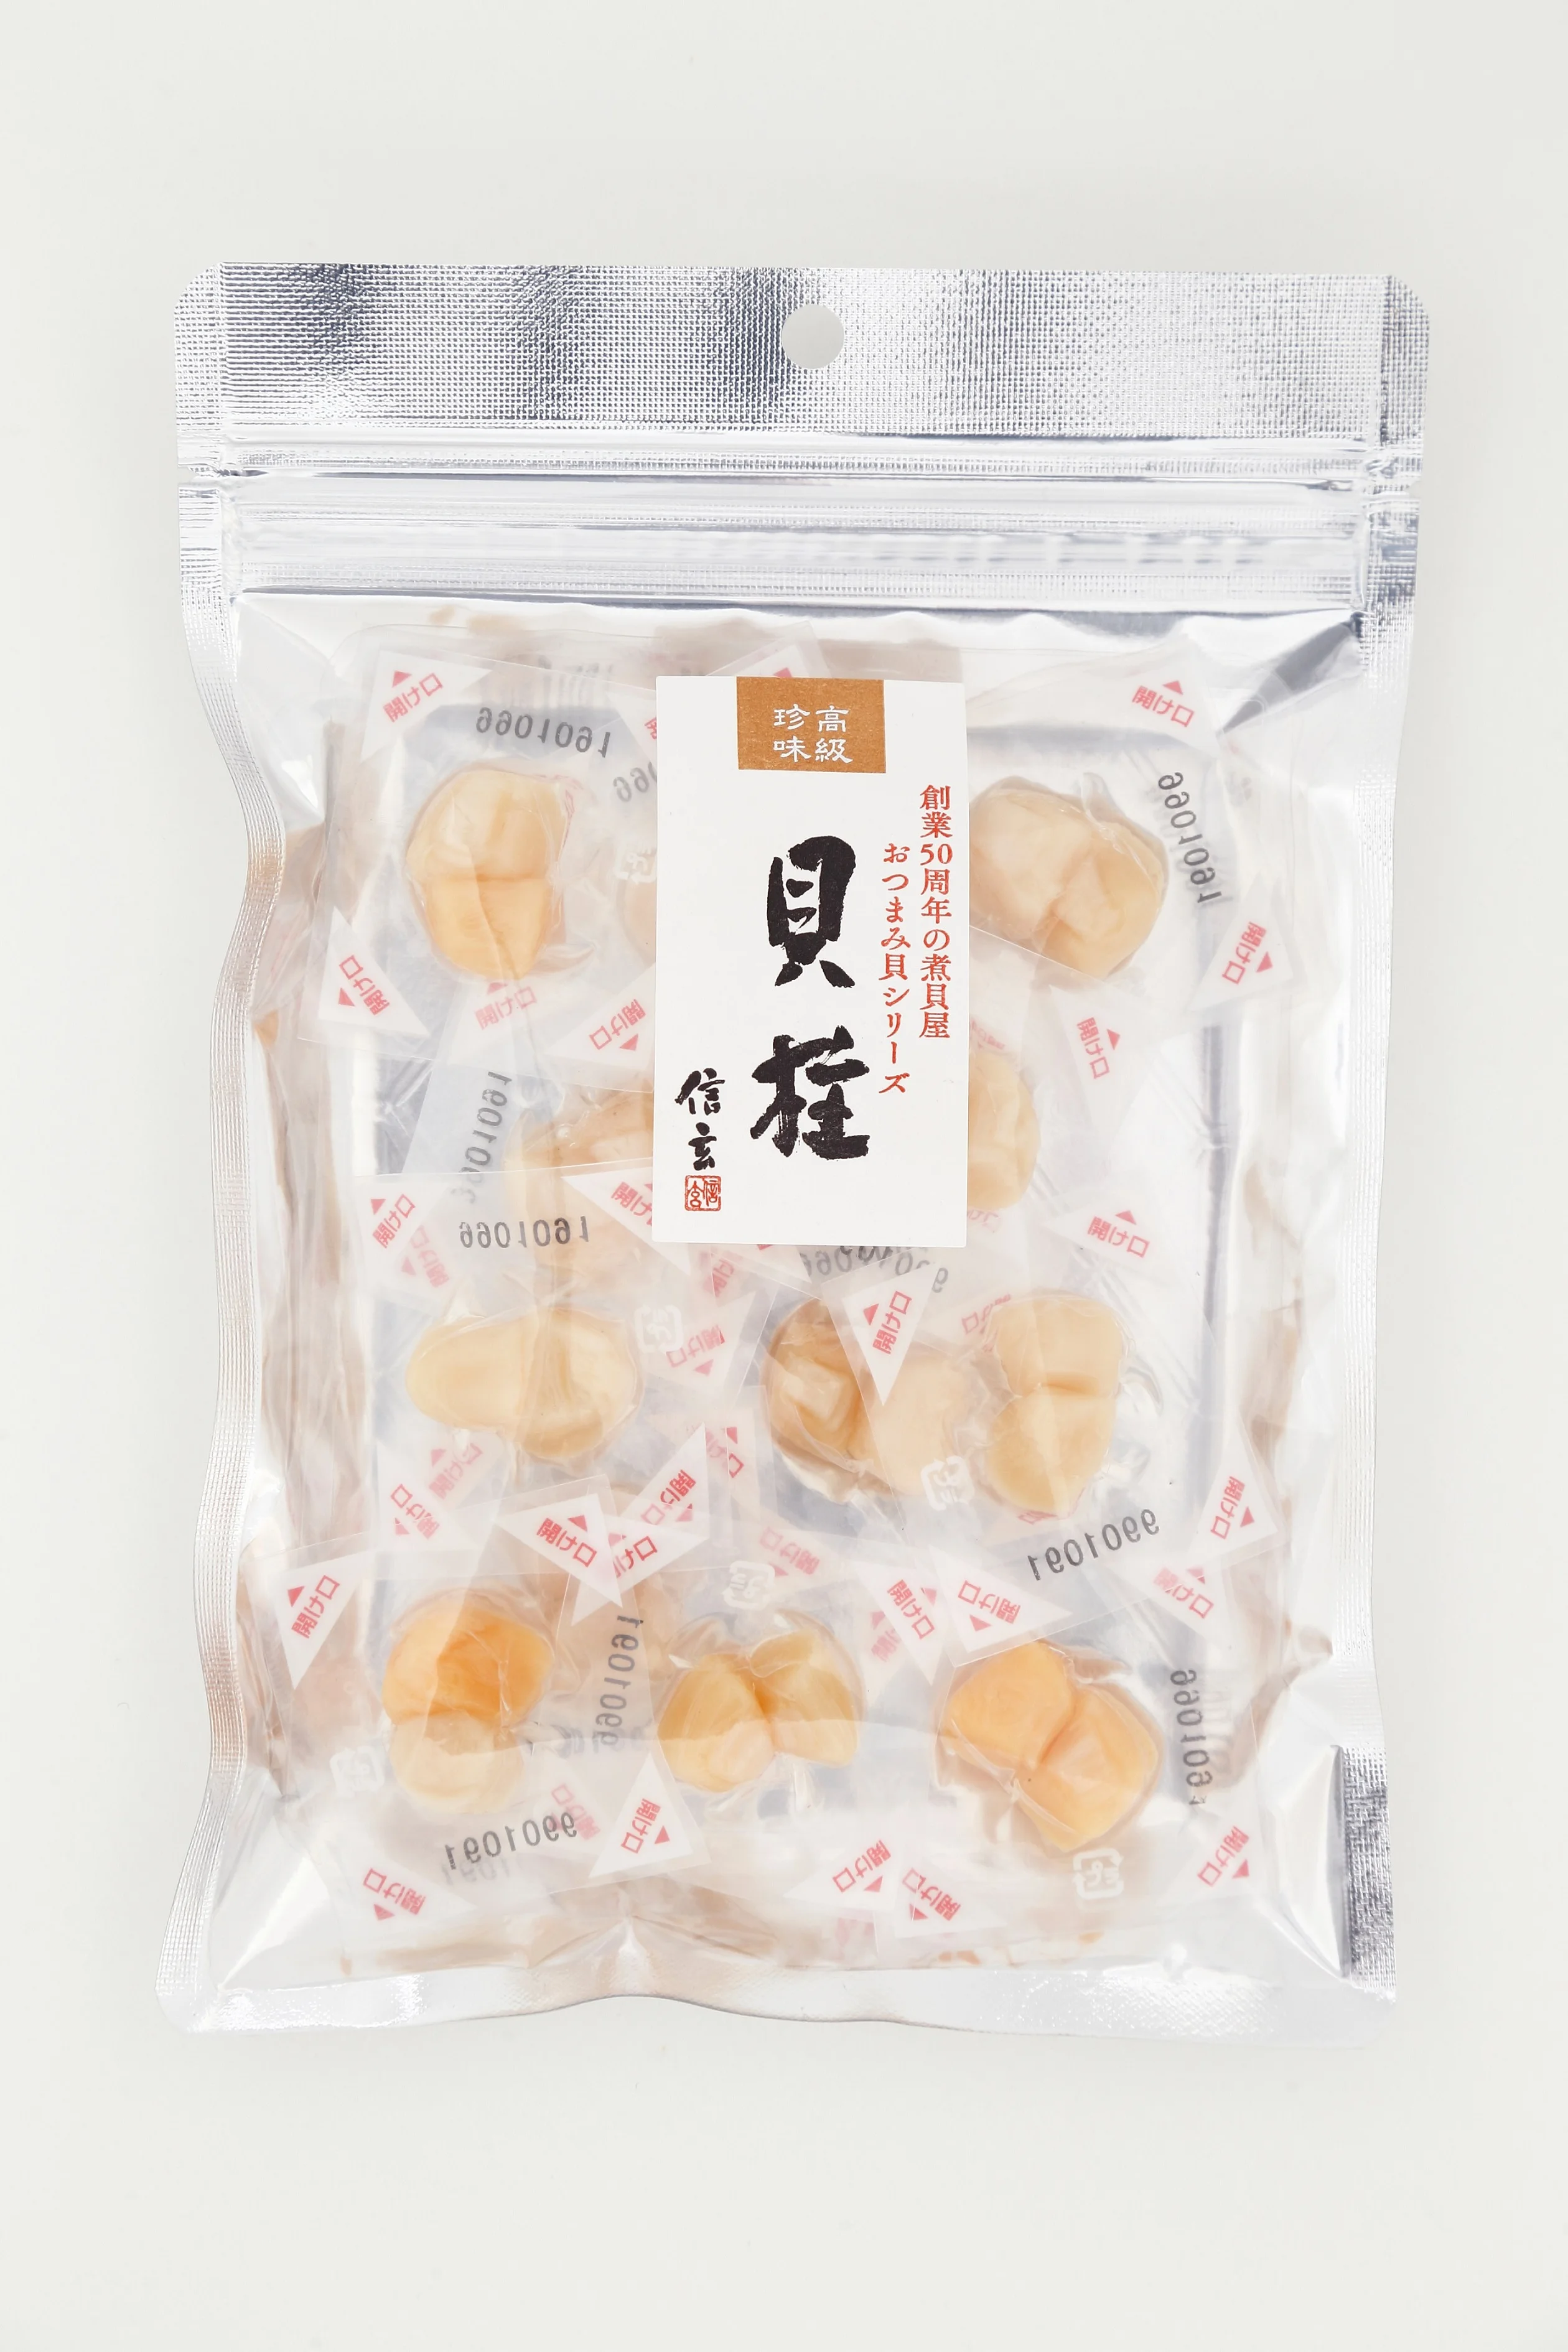 
Wholesale Japan Seafood Appetizers dried scallop for annual supply 